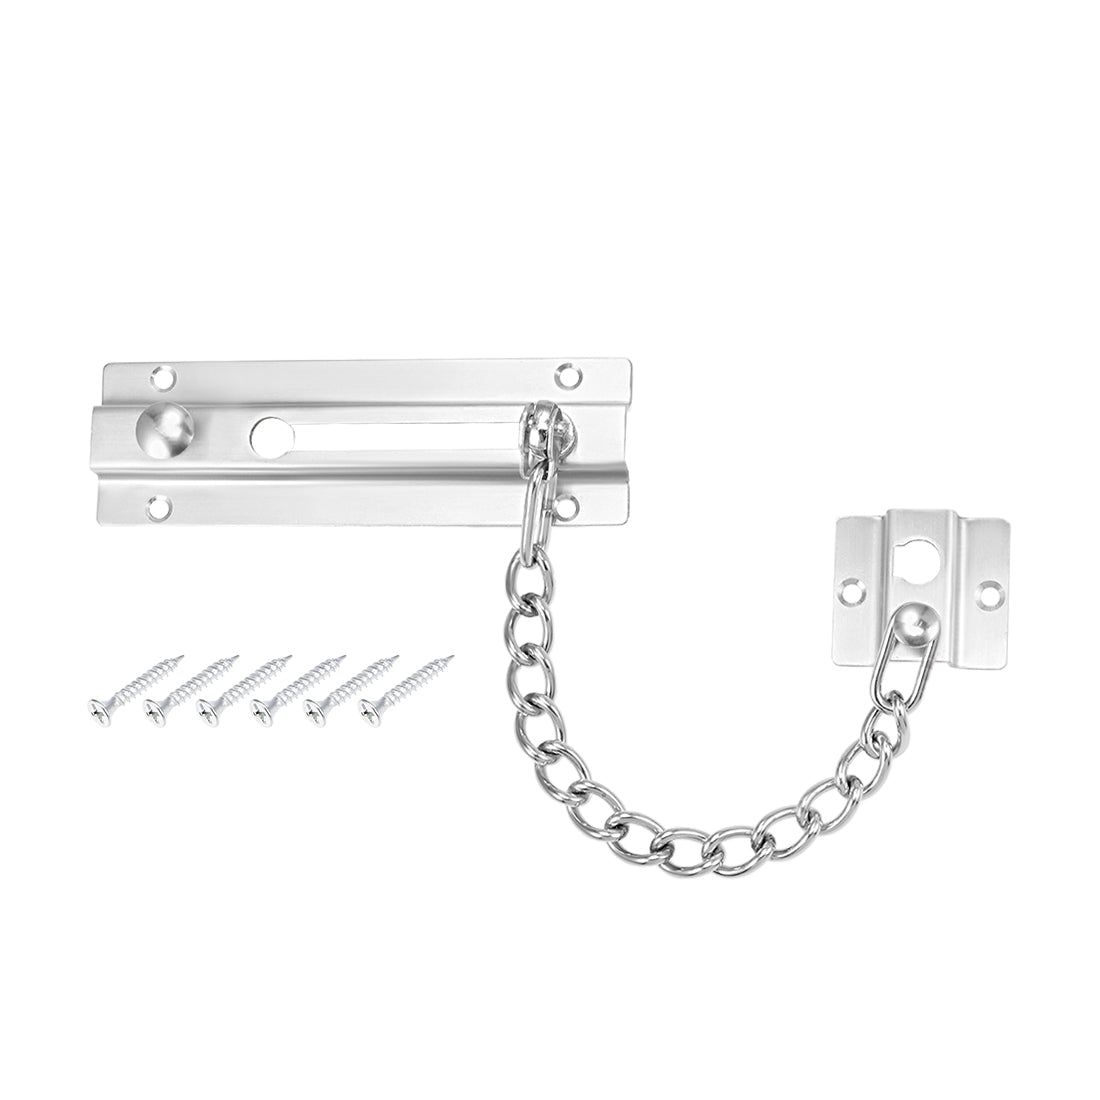 uxcell Uxcell Chain Door Guard Lock Security Safety Latch with Spring Anti-Theft Press Lock Silver